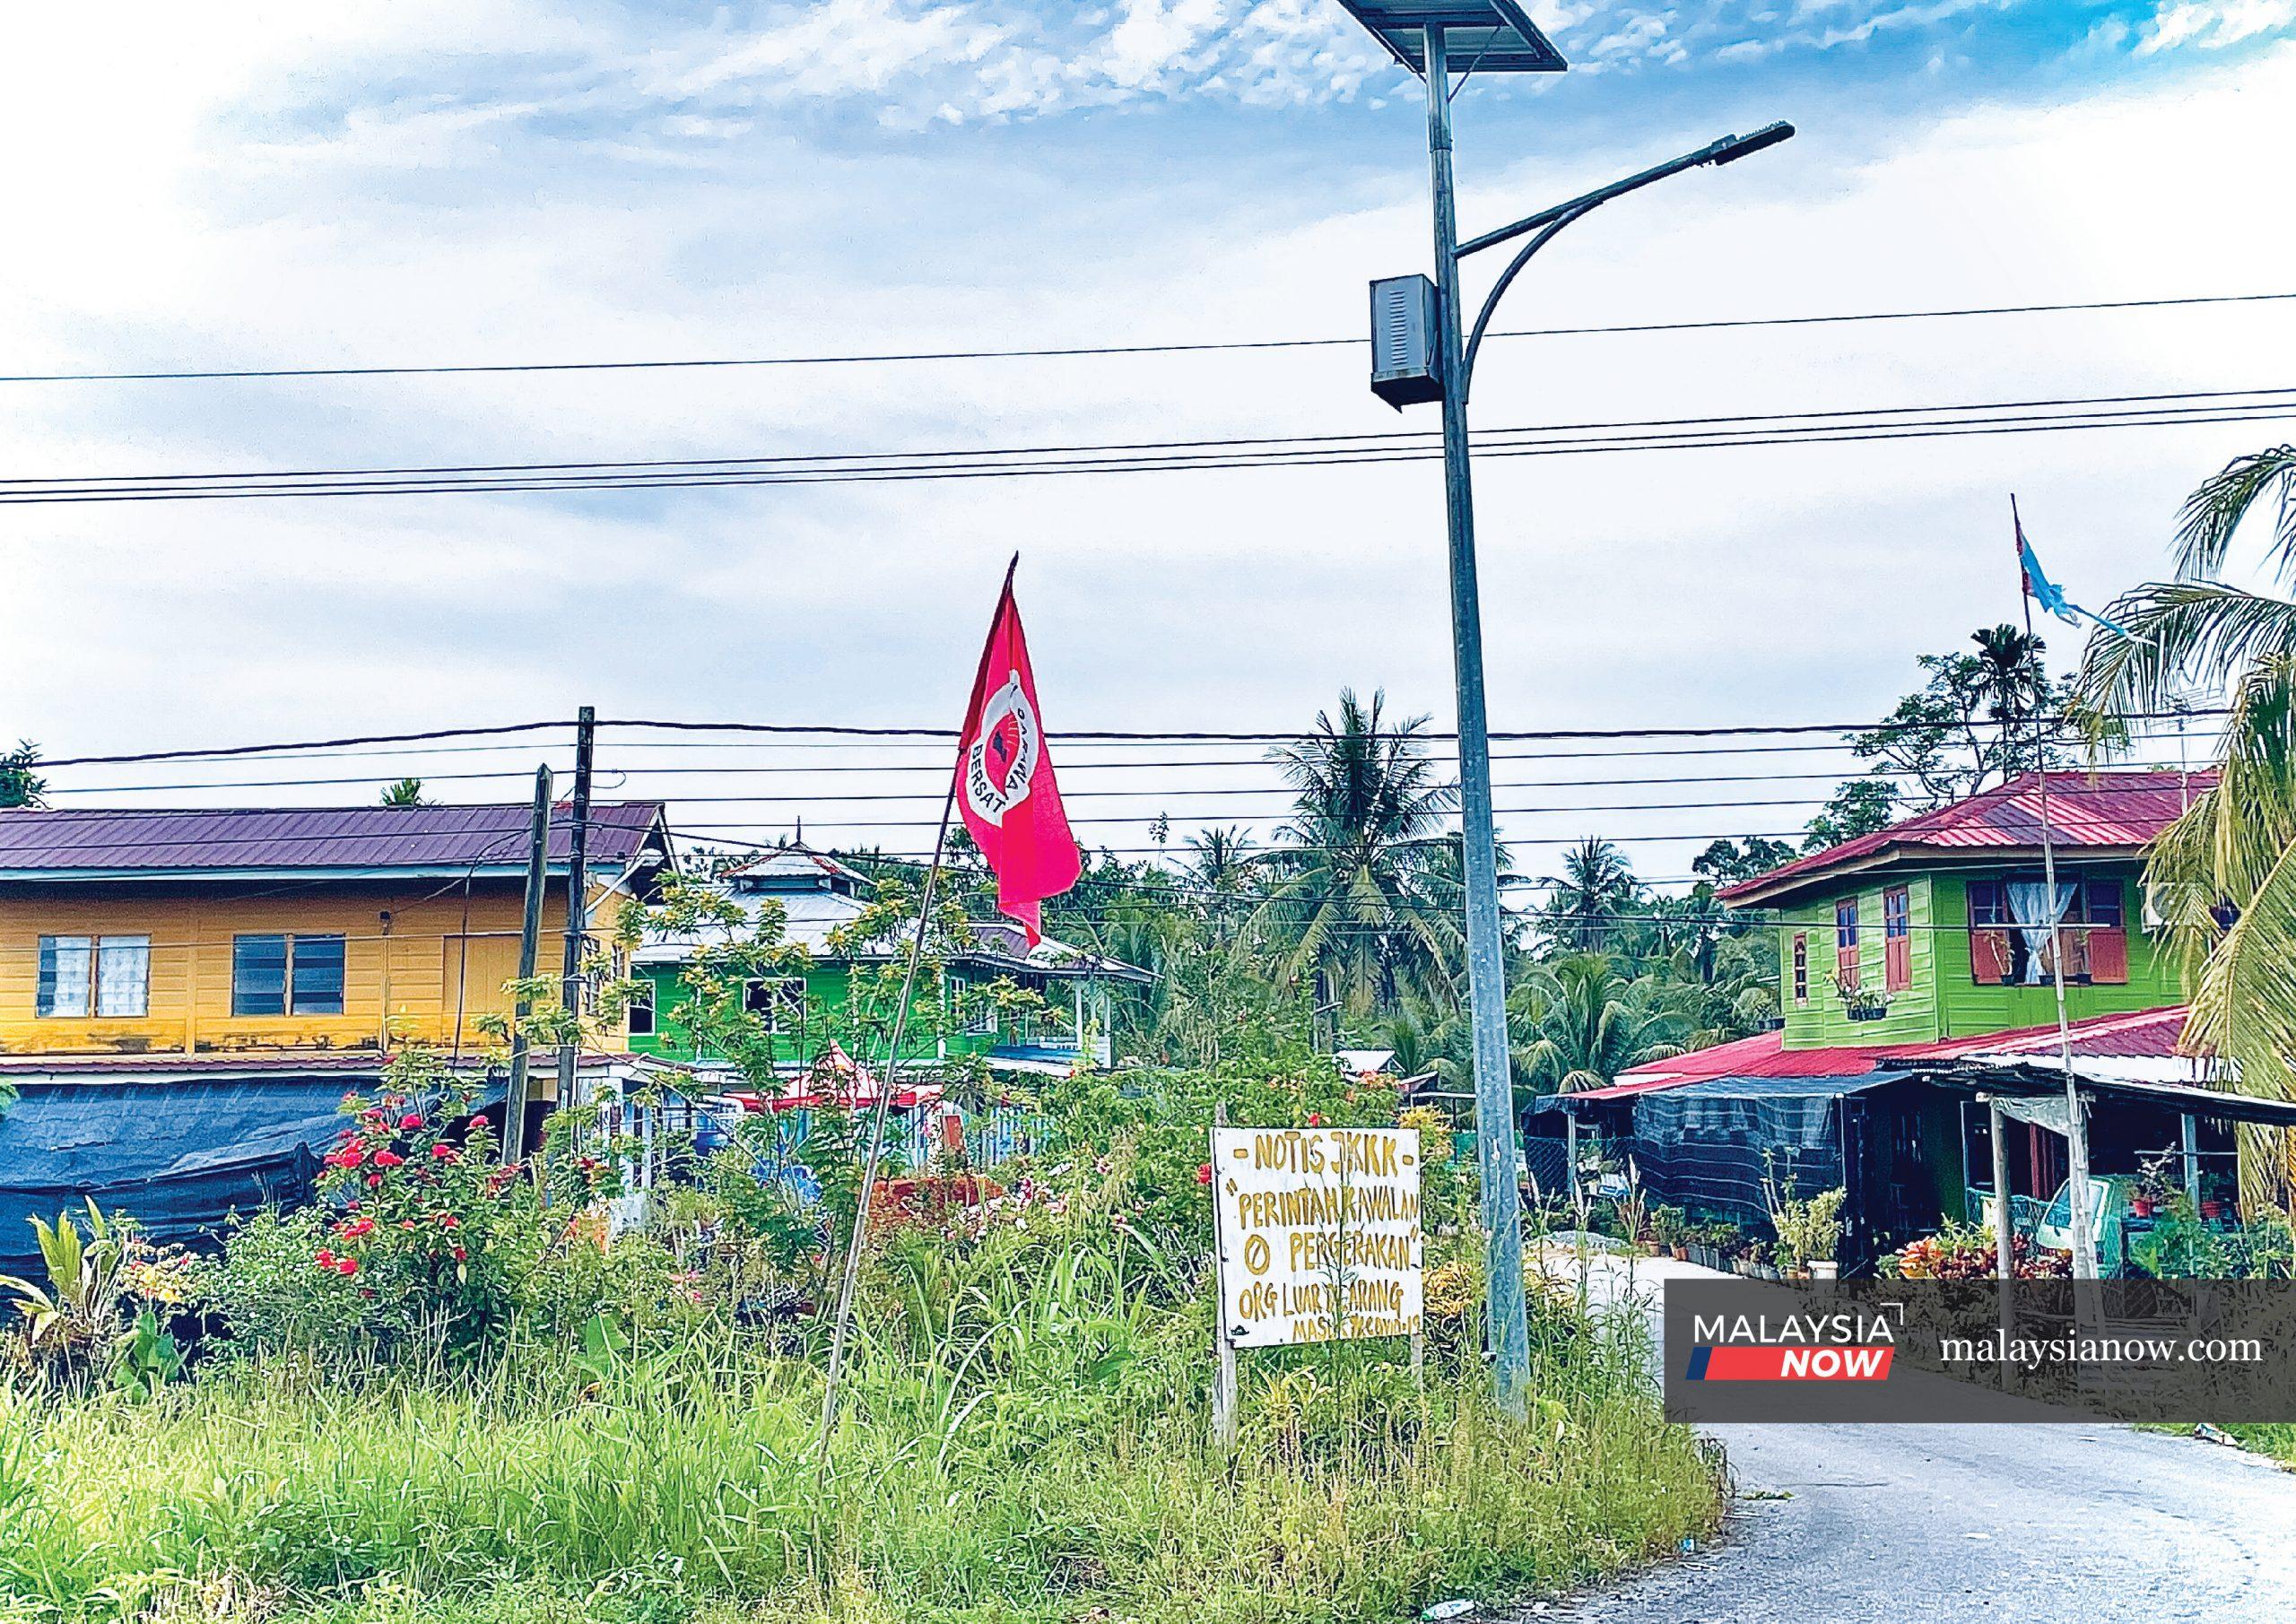 A Parti Sarawak Bersatu flag flutters in the town of Asajaya in Samarahan, Sarawak. Most of the seats in the state are held by GPS, which says it intends to contest all 82 state seats in the upcoming Sarawak election.